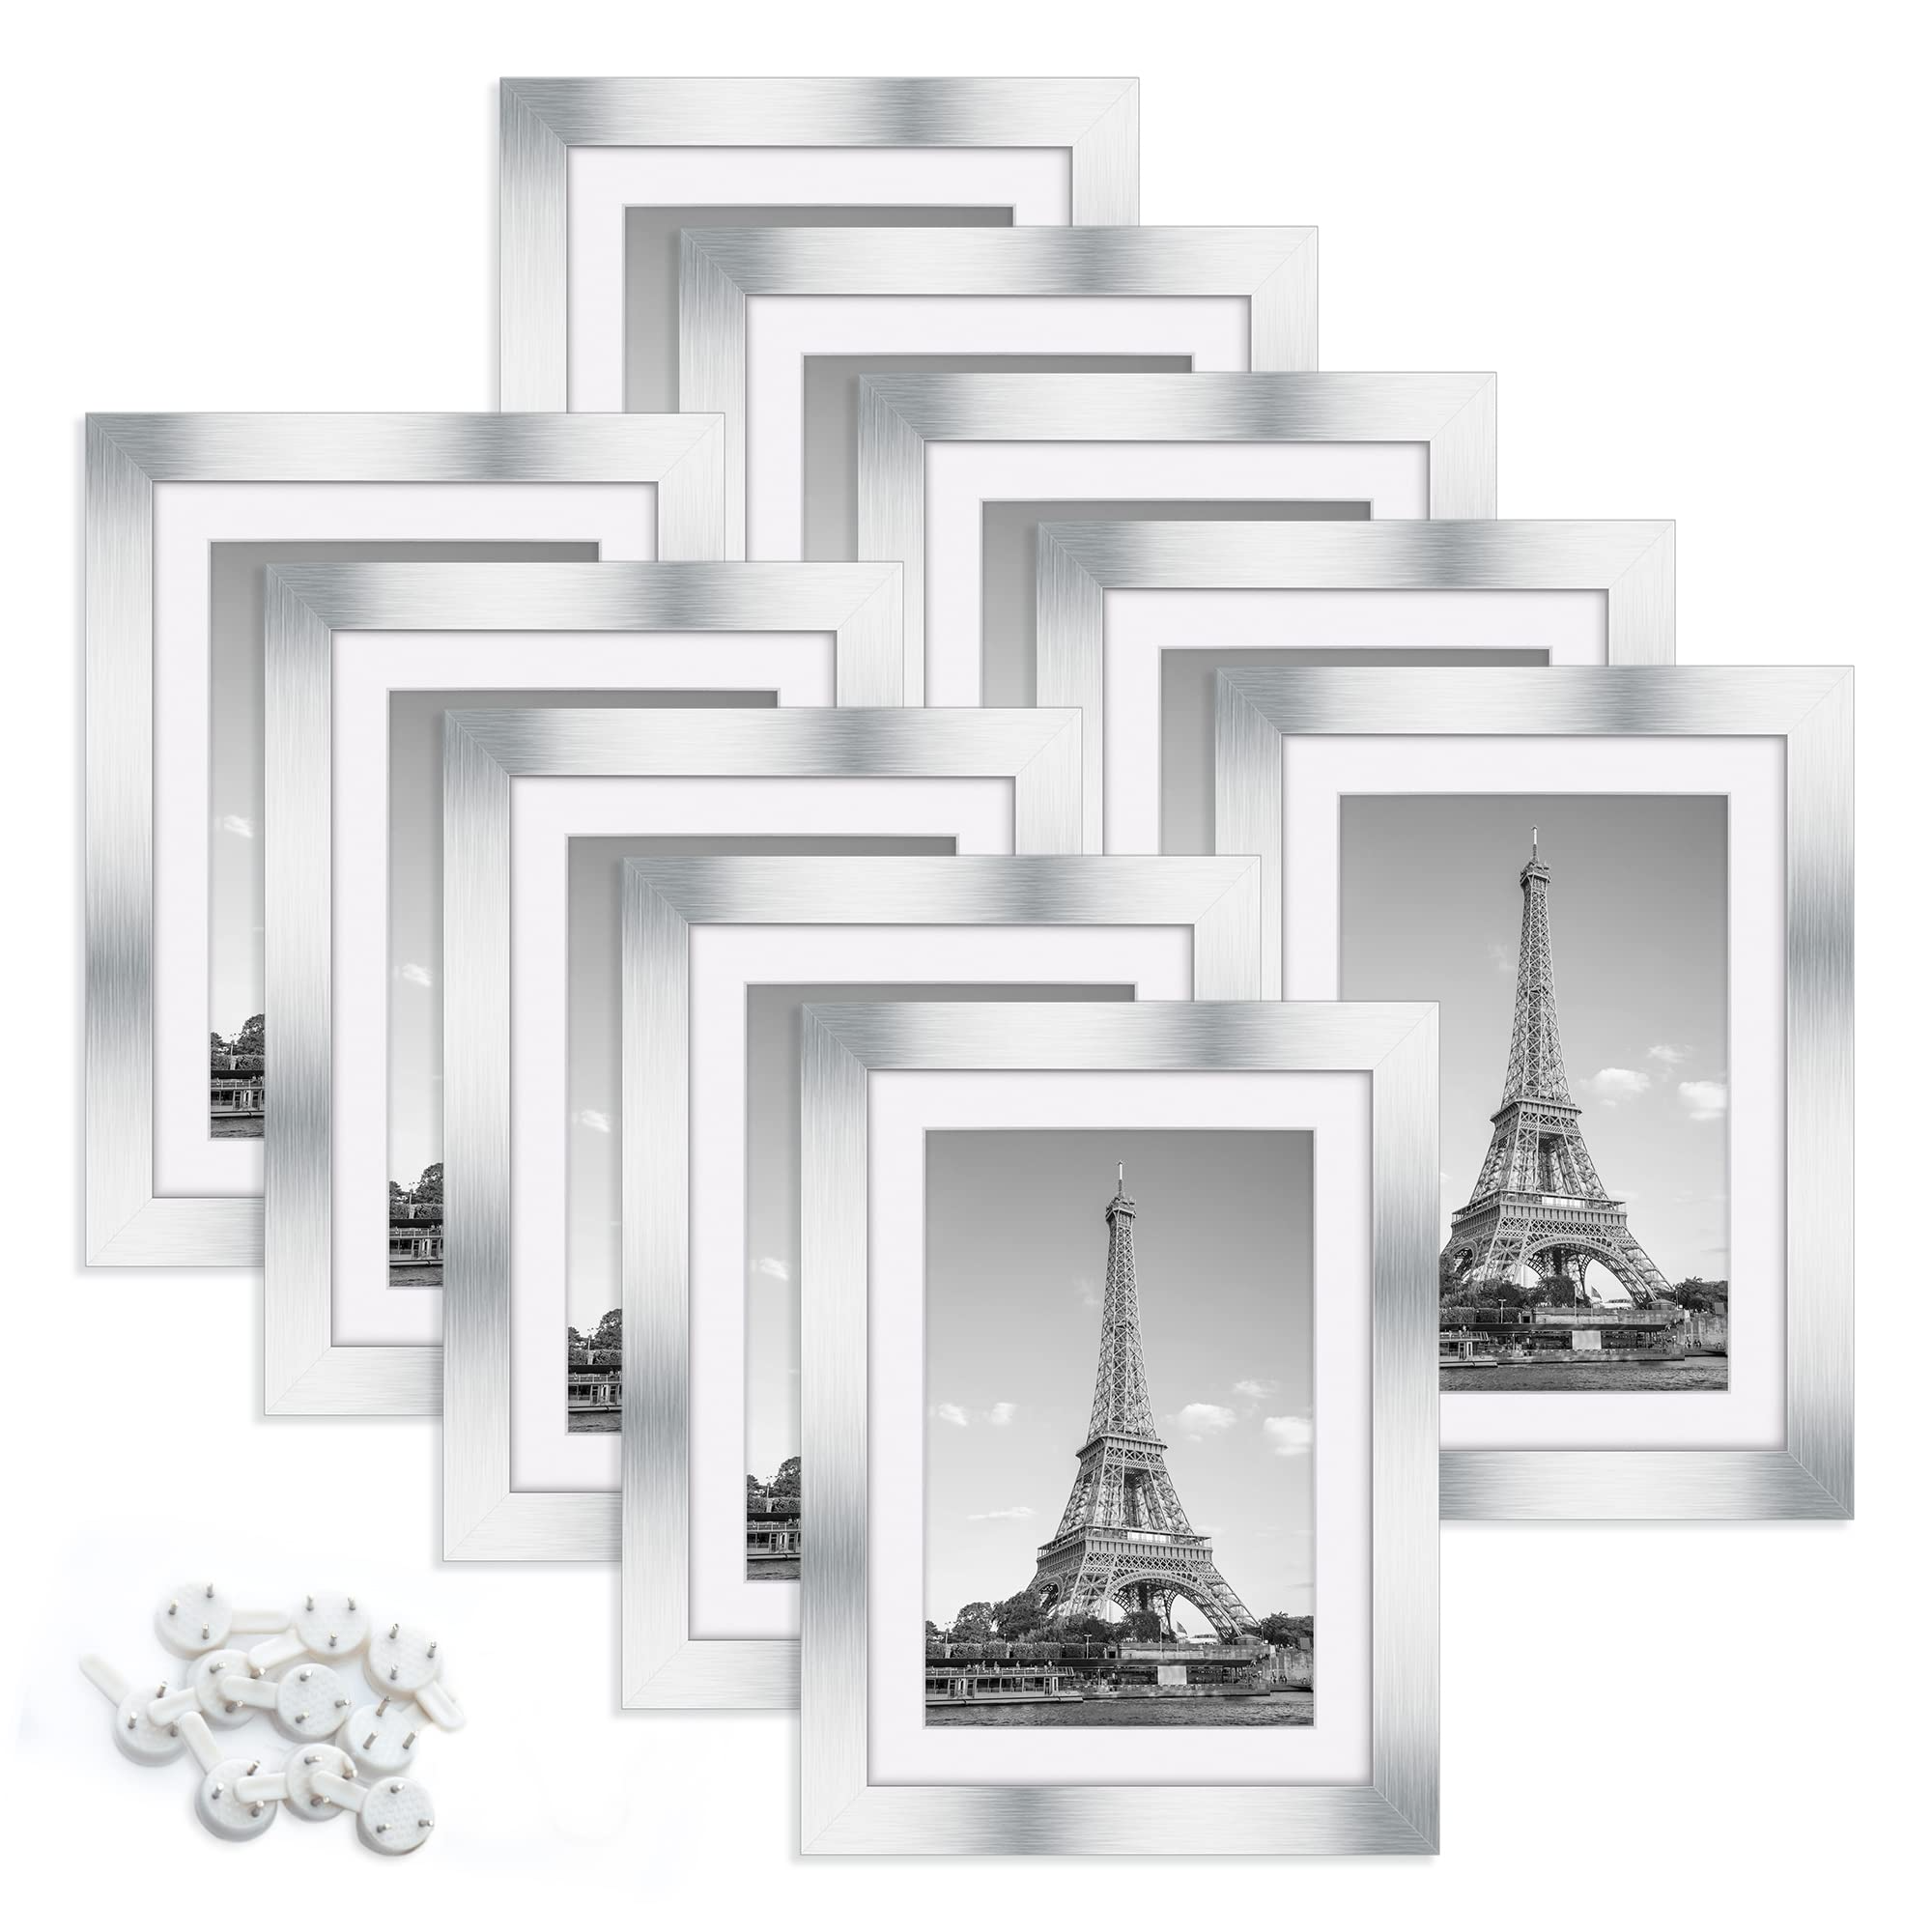 upsimples 5x7 Picture Frame Set of 10,Display Pictures 4x6 with